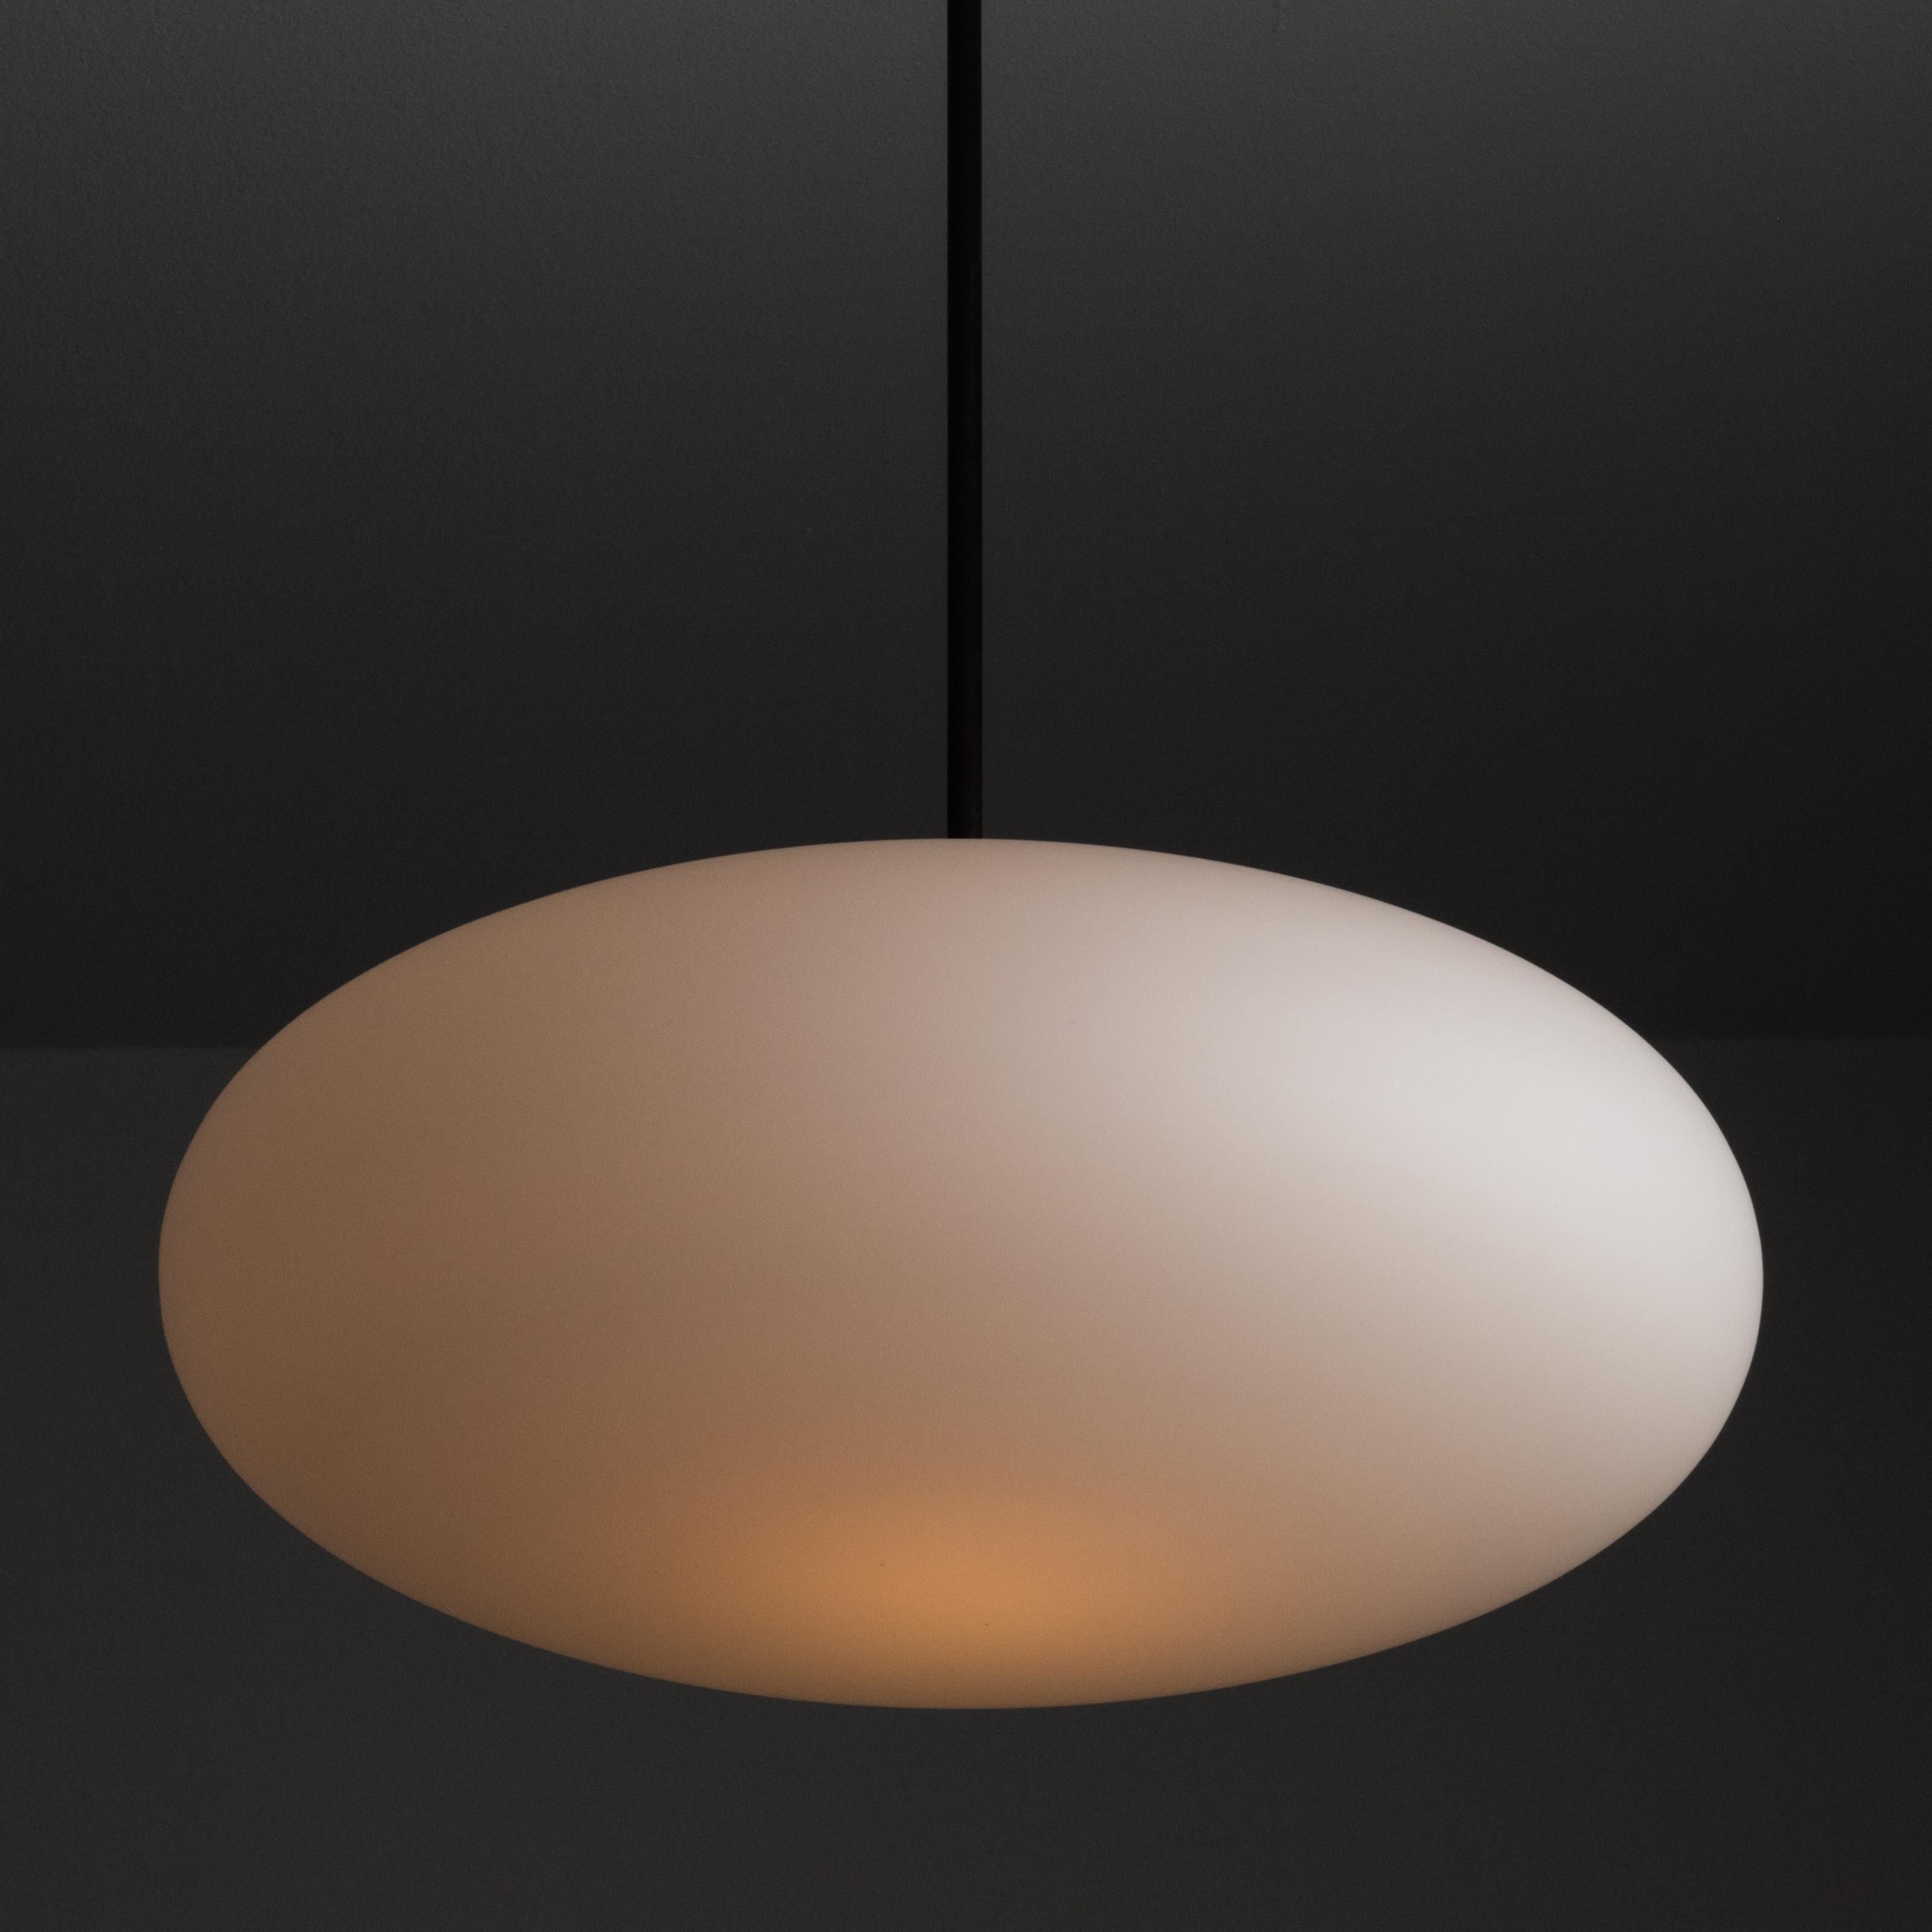 Ceiling Light by Angelo Lelii for Arredoluce. Designed and manufactured in Italy, circa the 1960s. Beautiful white opal saucer is suspended by a patinated brass stem. Wired for US standards. Custom canopy for US applications. Bulb is not included.